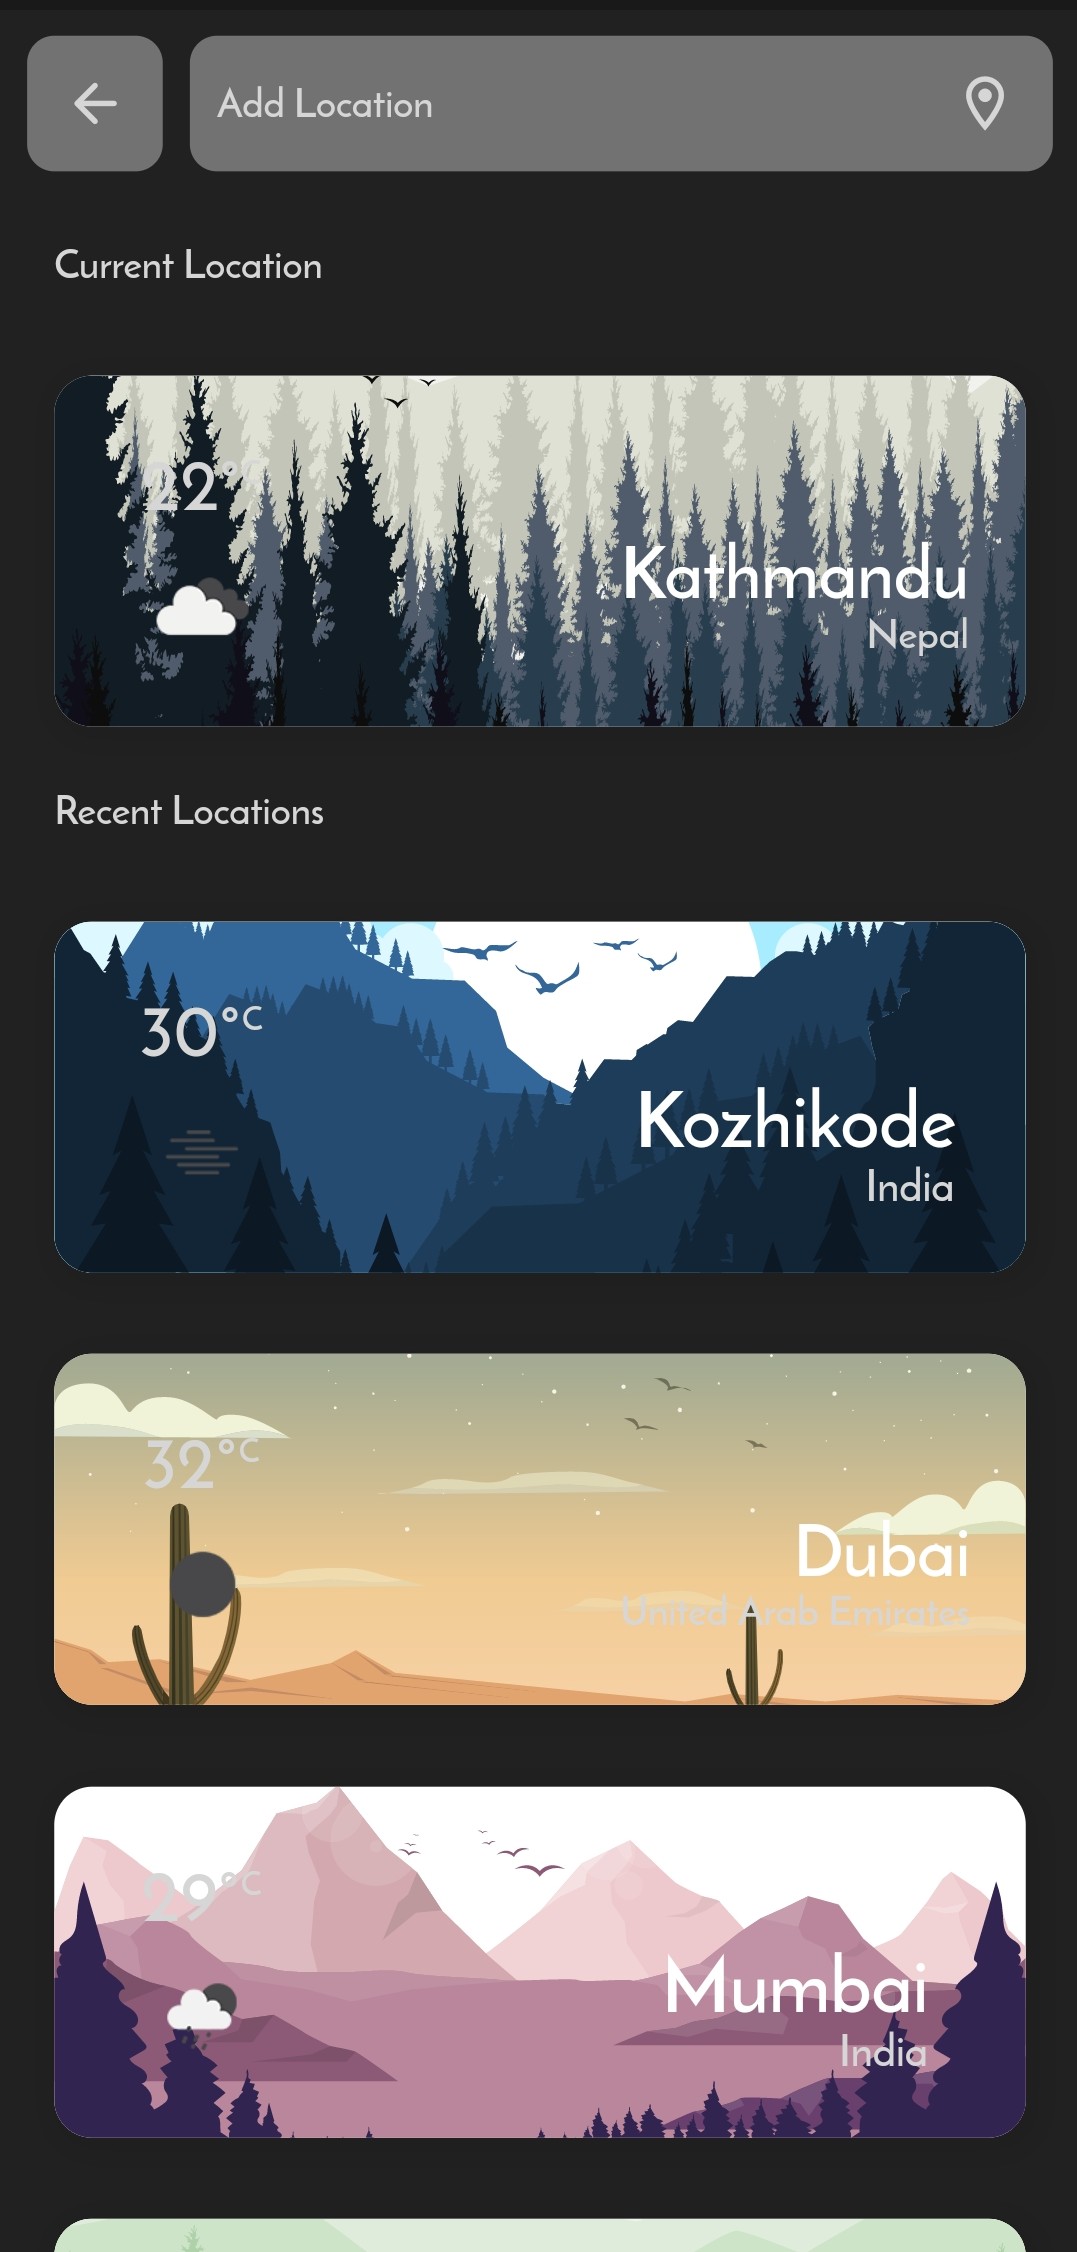 A simple weather forecast app uses Flutter and WeNowAPI